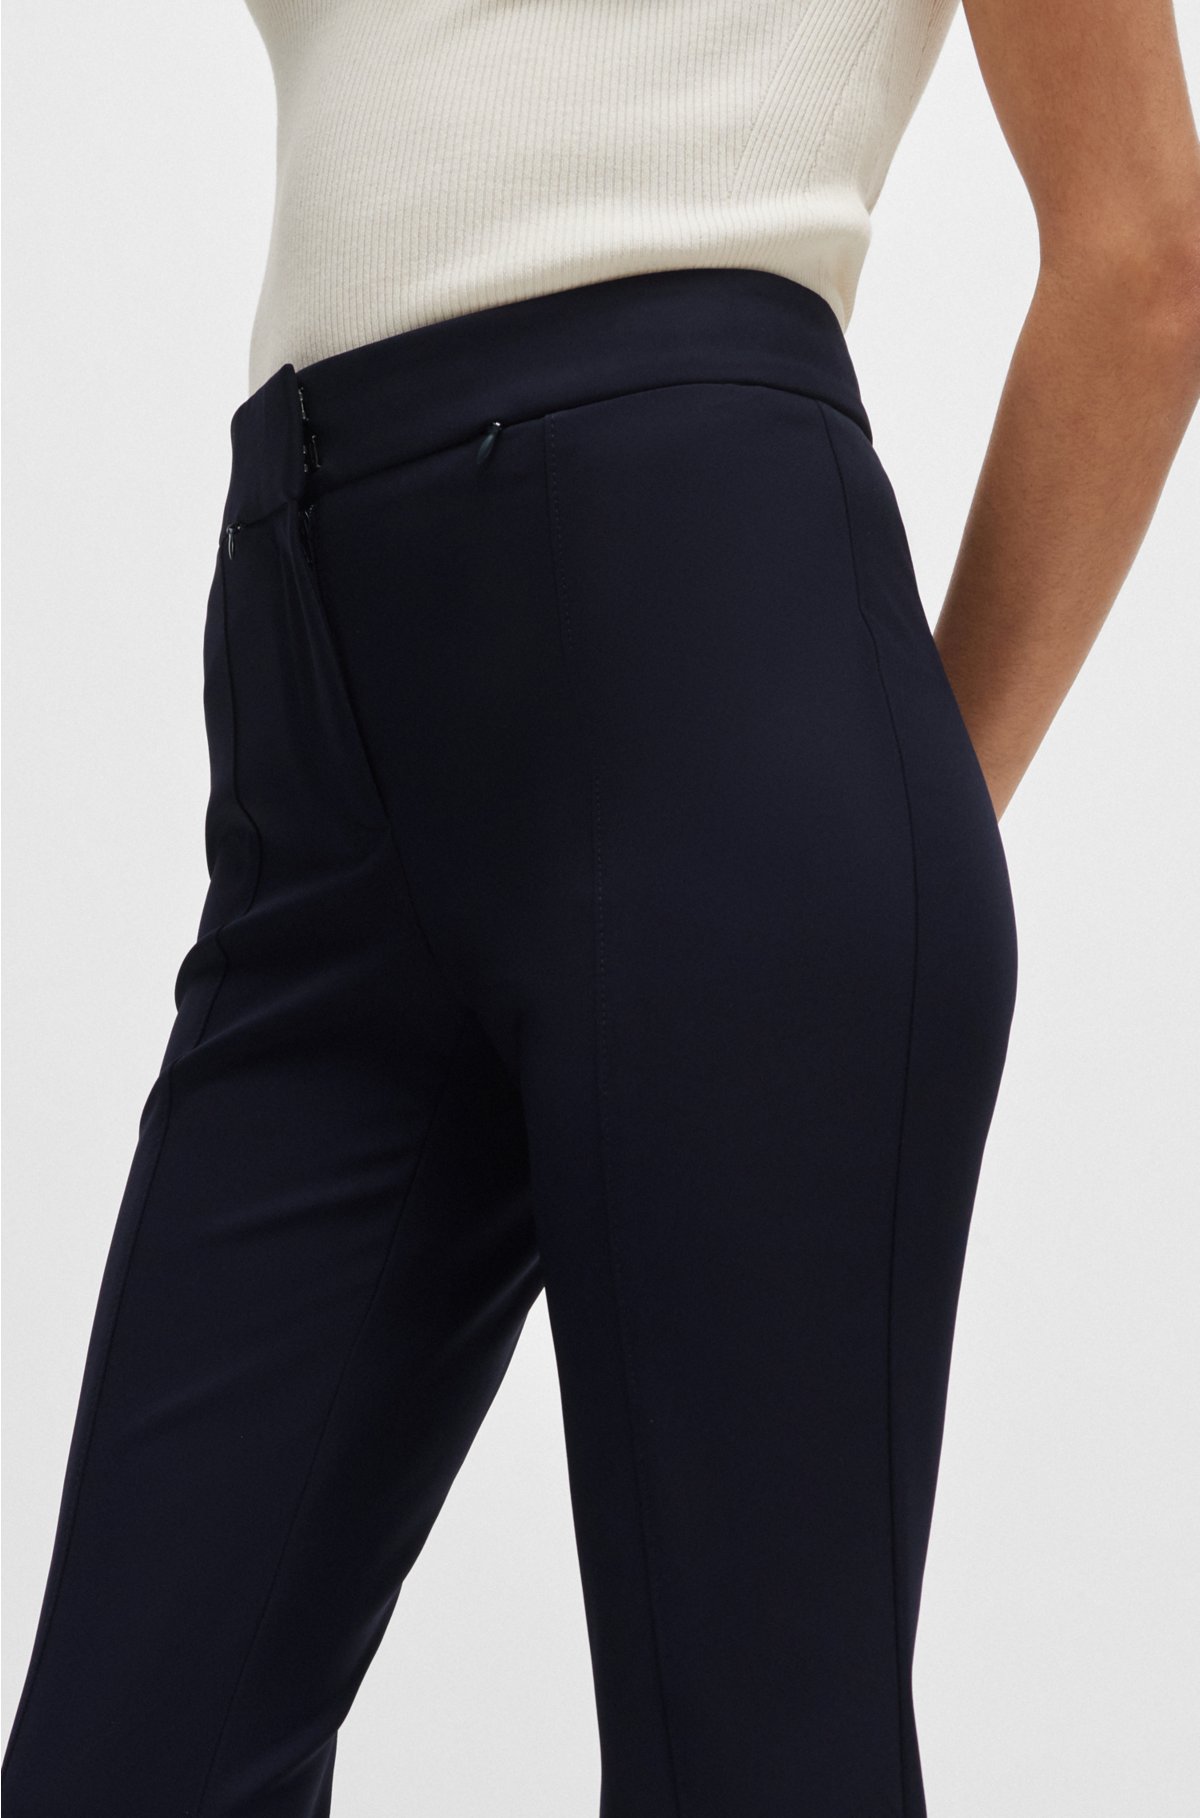 Extra-slim-fit trousers in quick-dry stretch cloth, Dark Blue